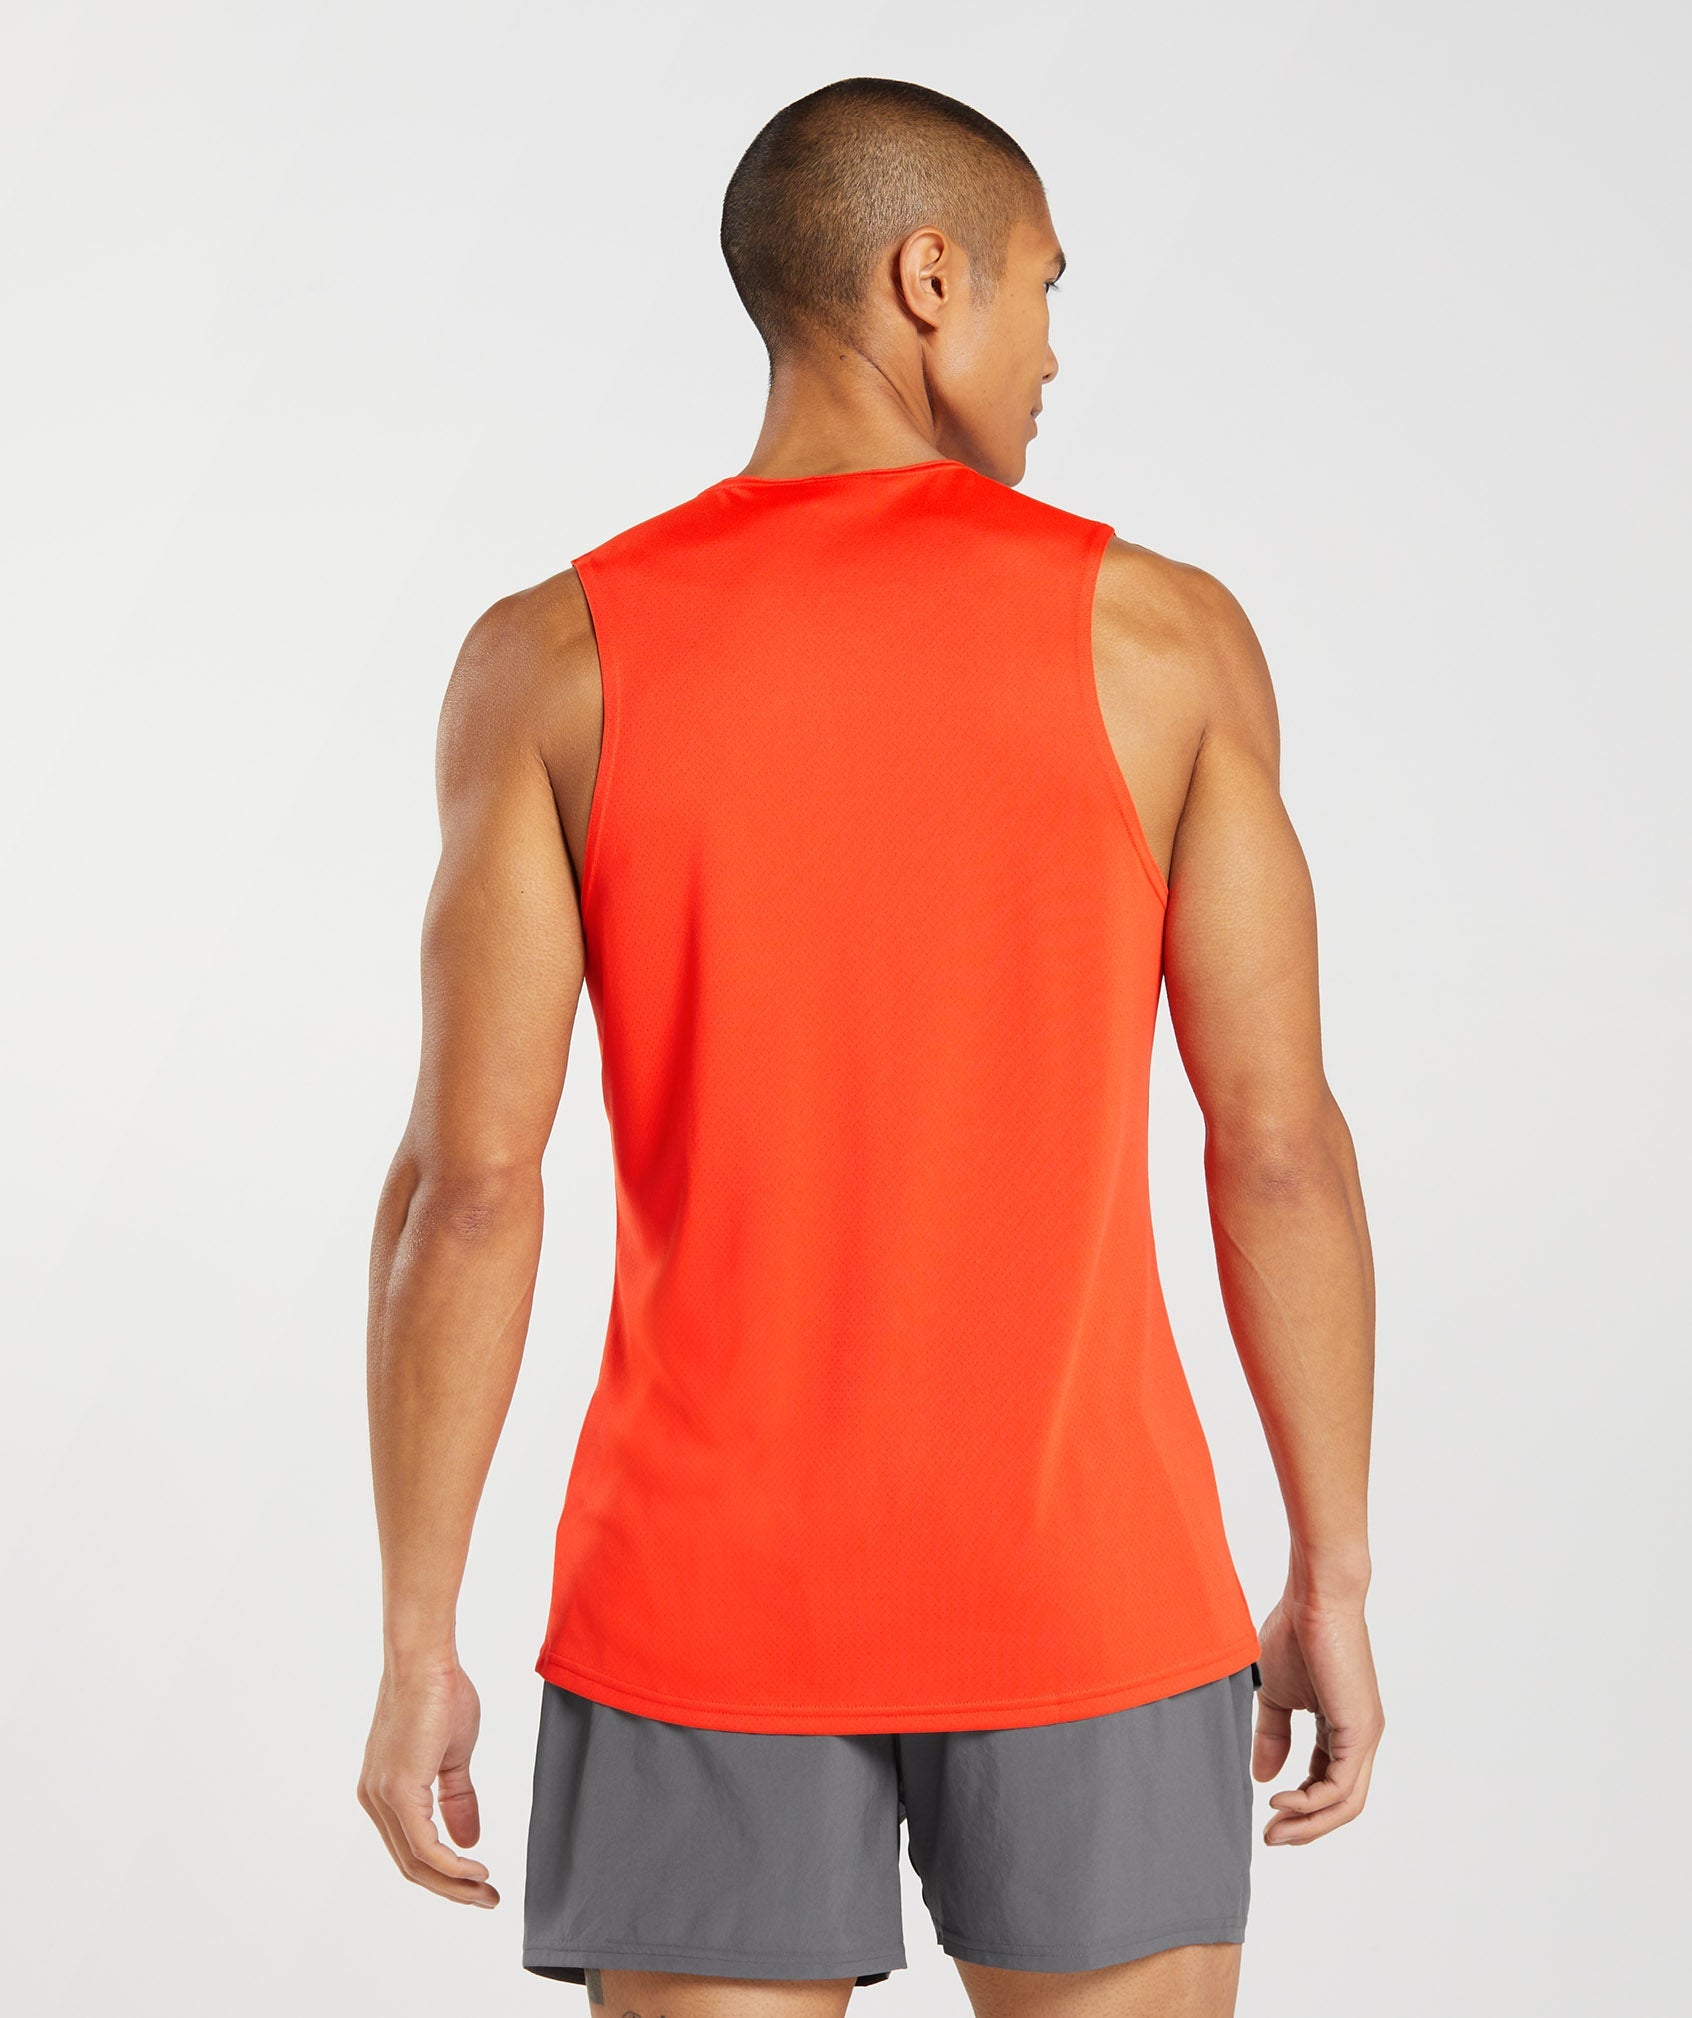 Arrival Tank in Pepper Red